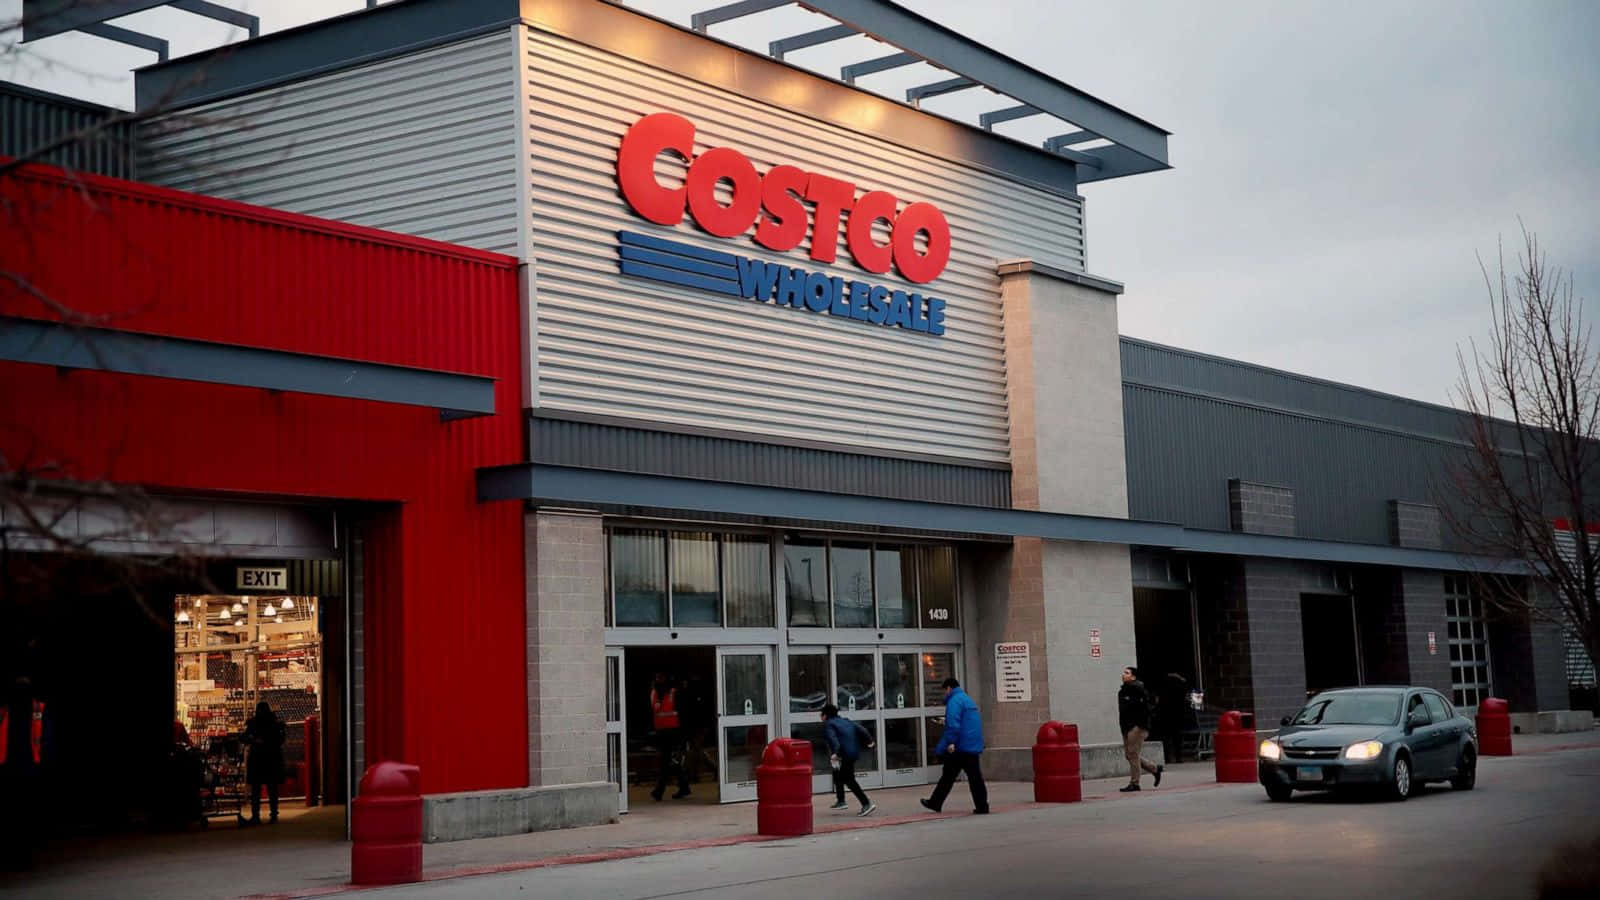 Costco Is A Large Store With A Red And Blue Sign